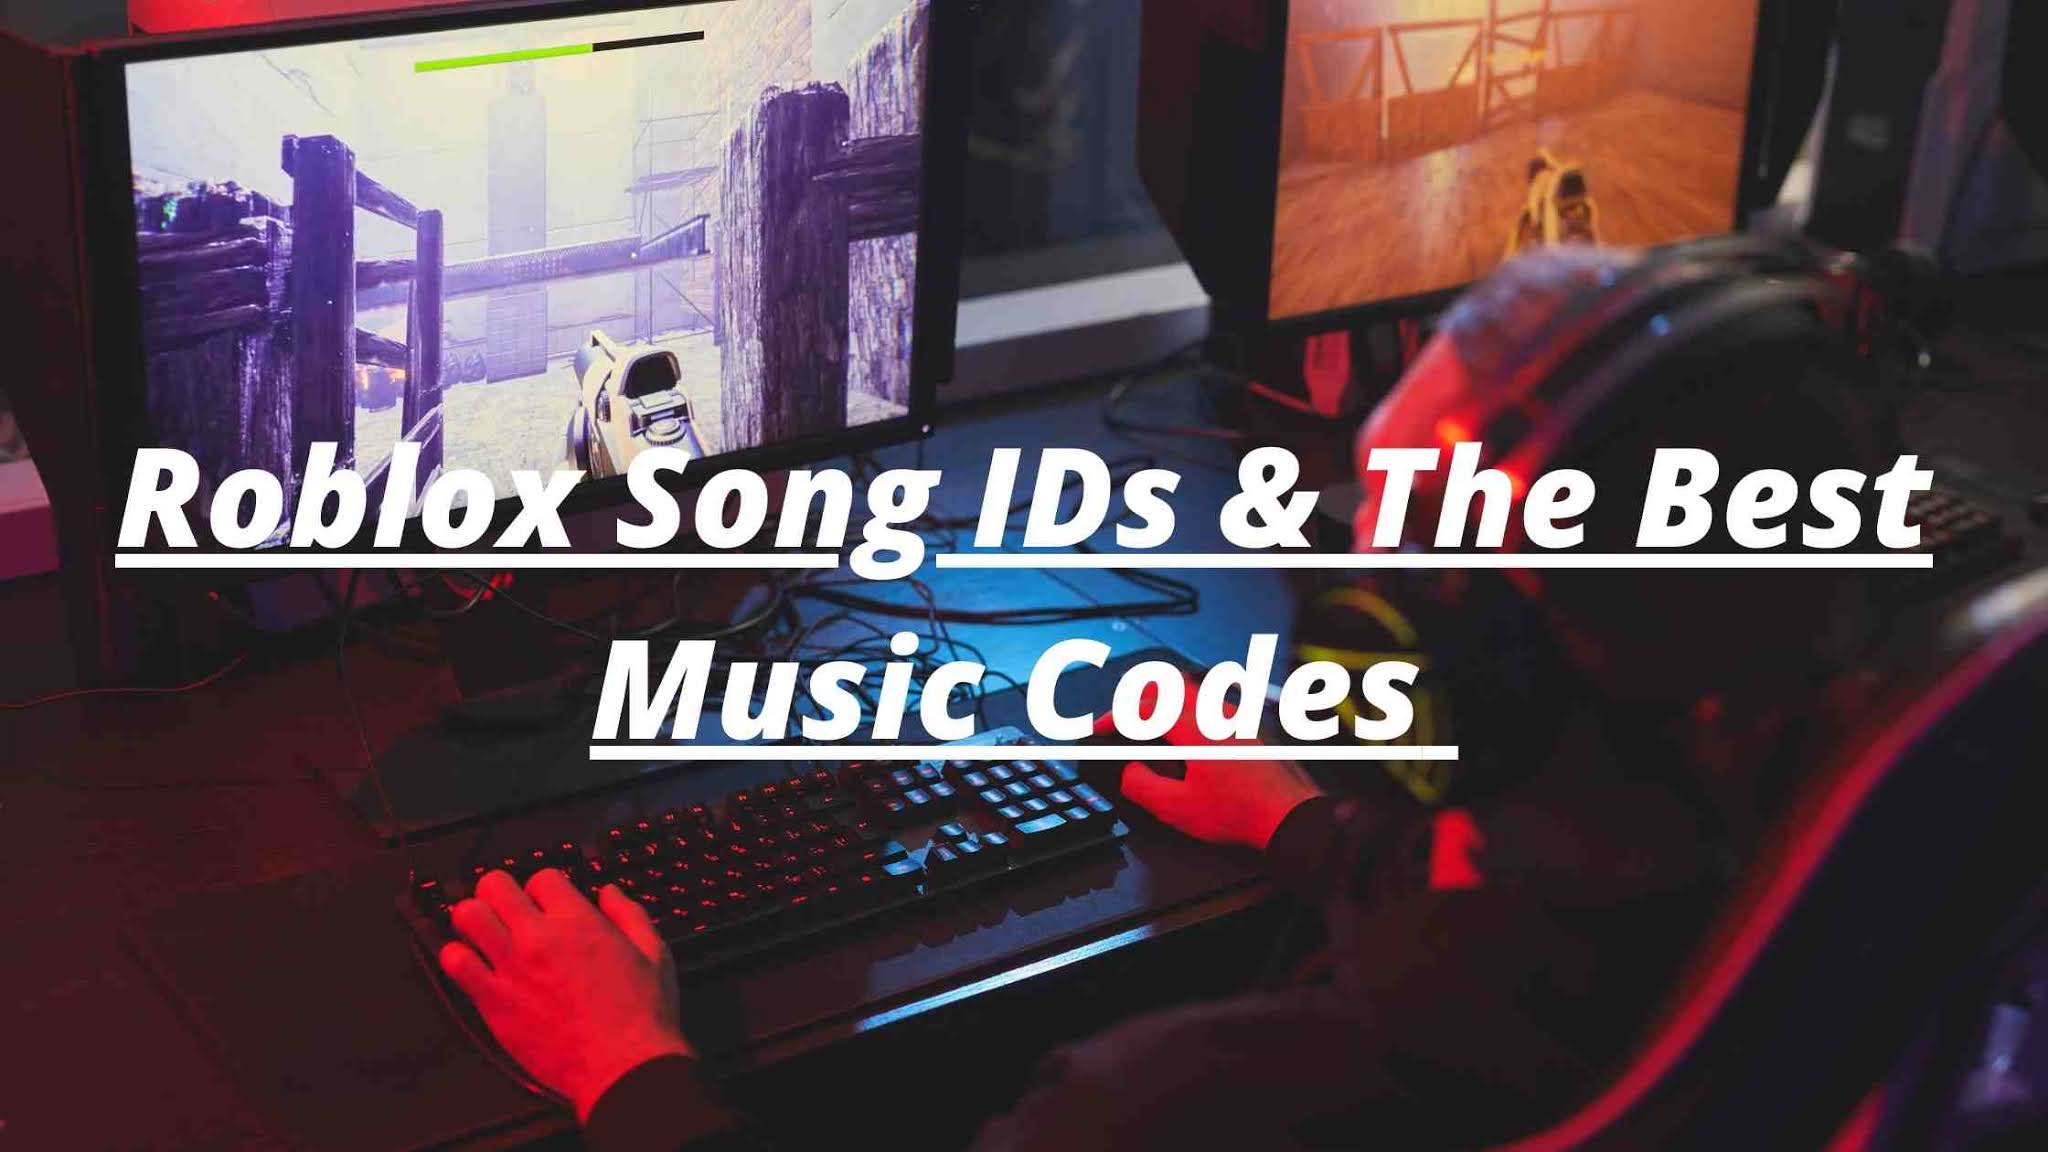 Roblox Boombox Id Old Town Road Lil Nas X Old Town Road Roblox Id Code Cute766 Roblox Audio Oof Lasagna Hack Za Robux Lena Linau - roblox radio codes old town road